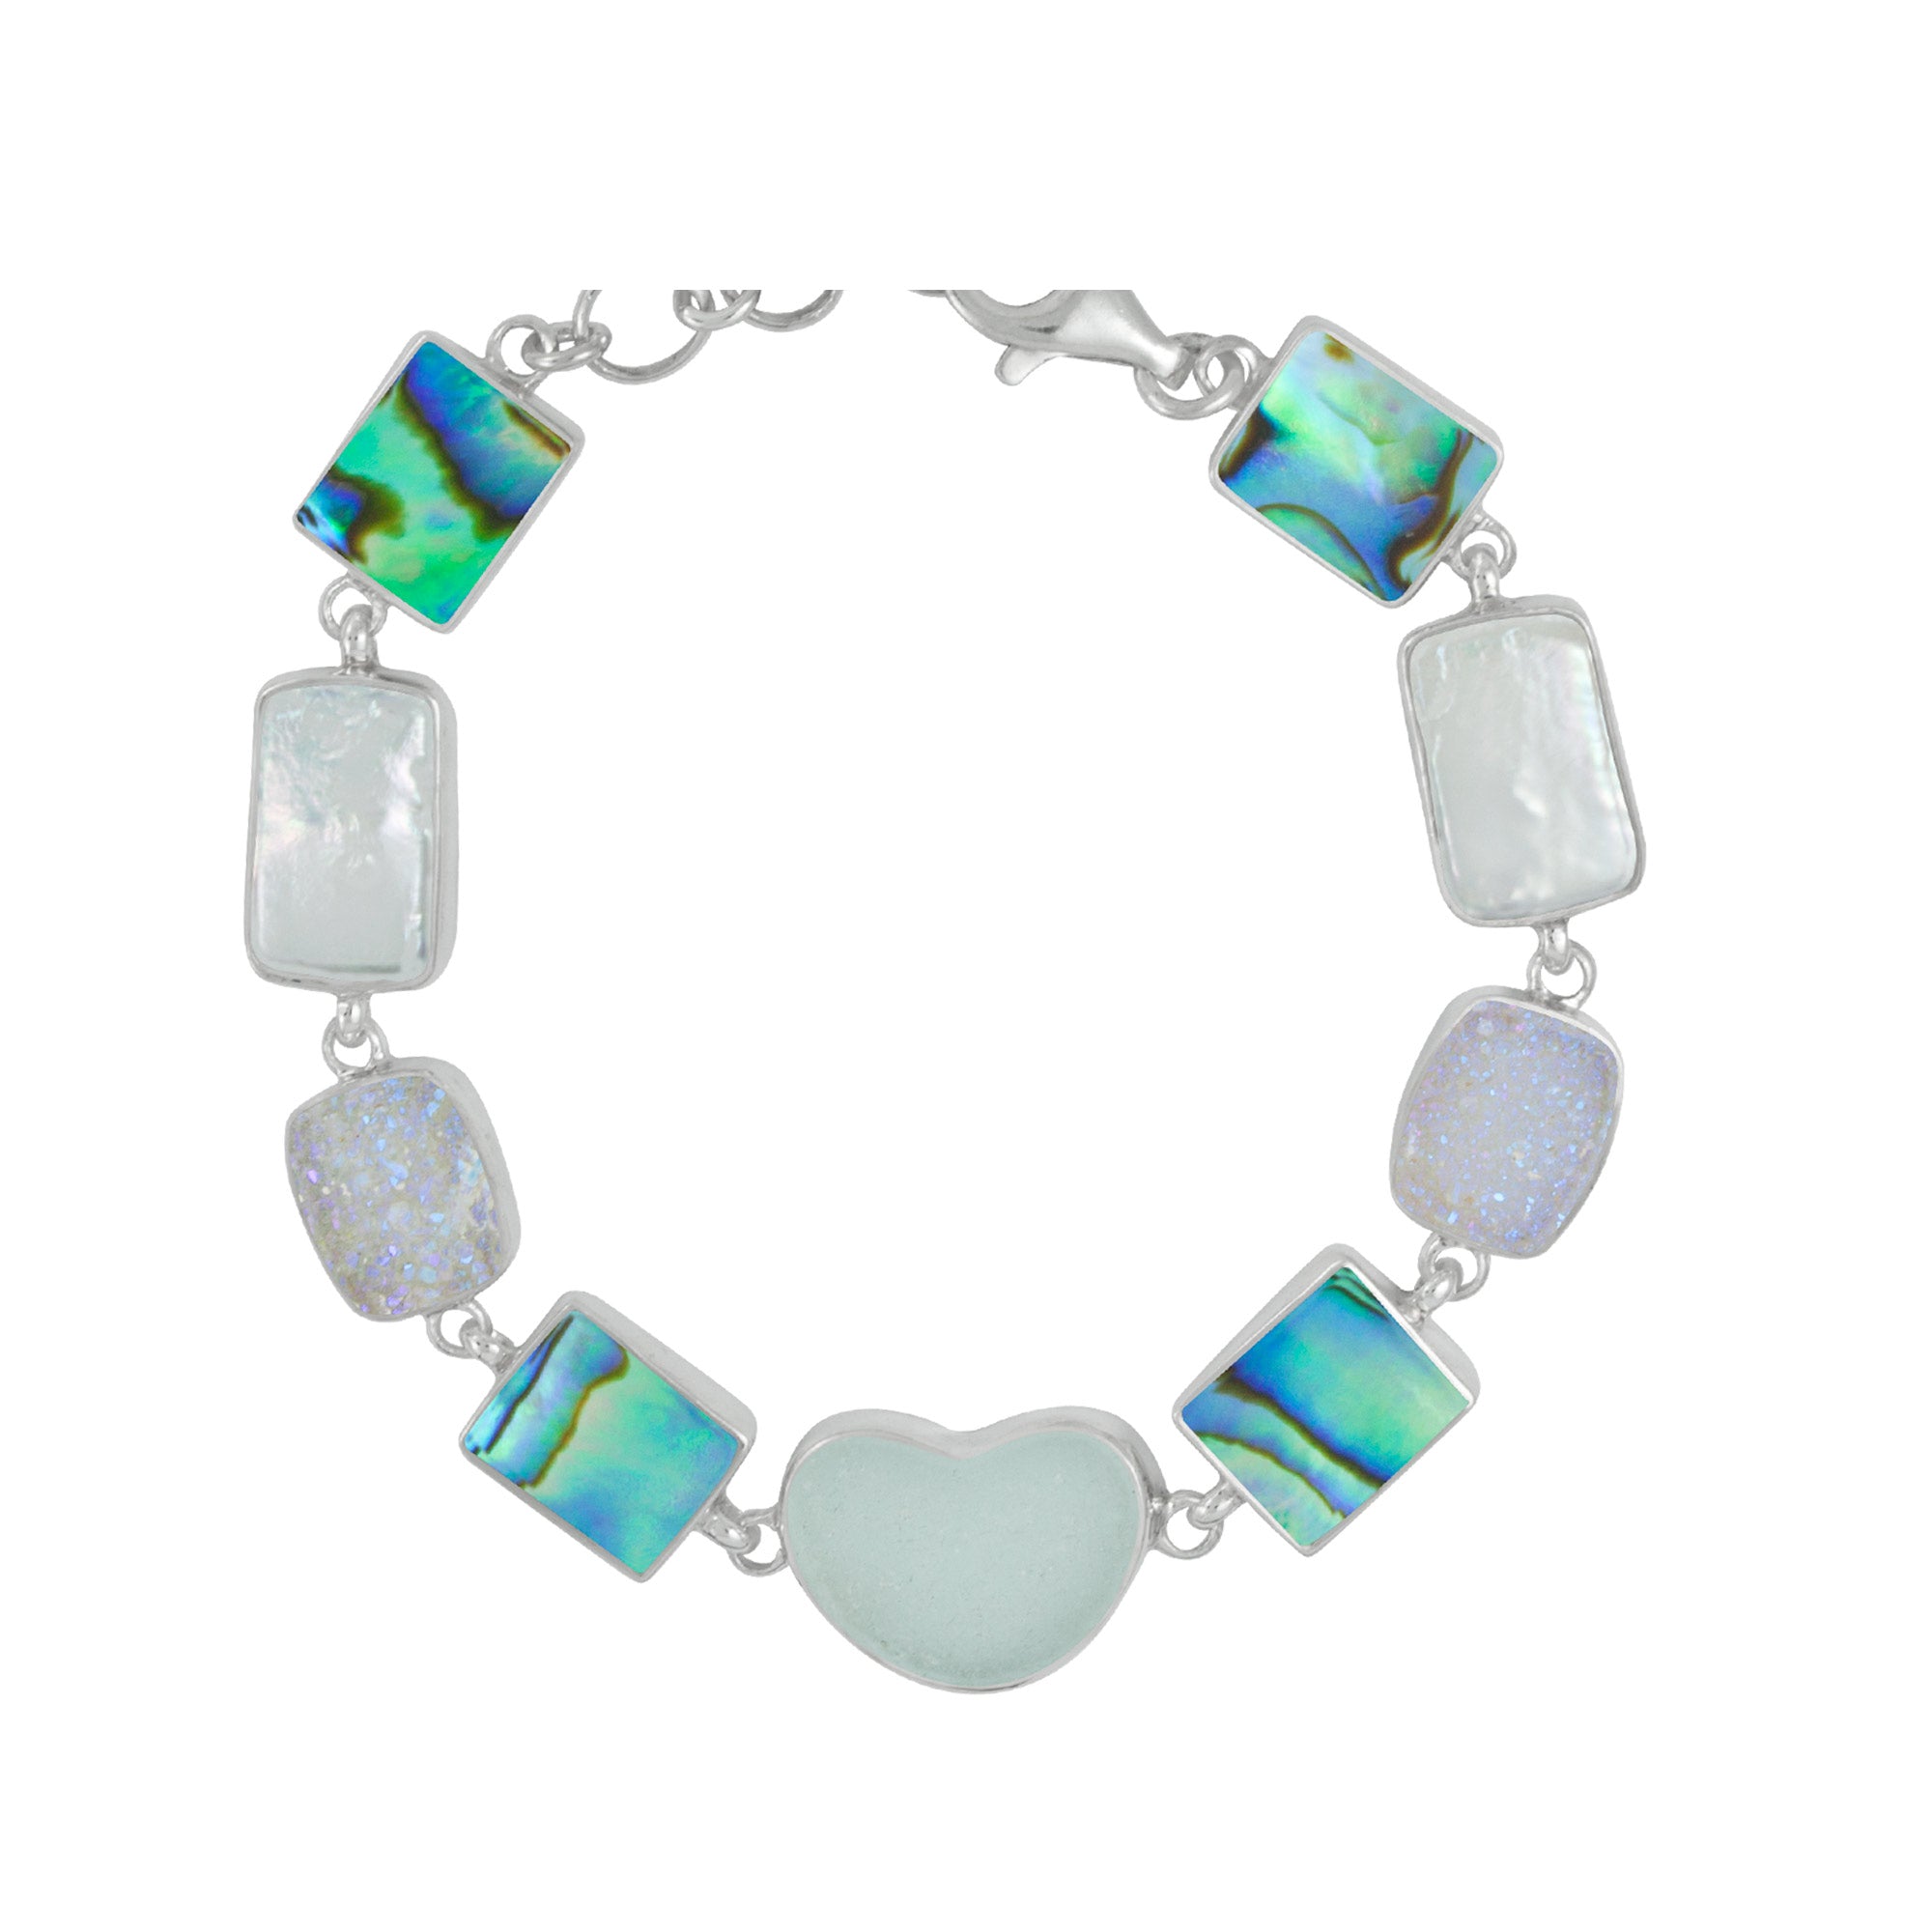 Gorgeous Sea Glass Heart bracelet  shimmering with Paua Shell and Druzy accents